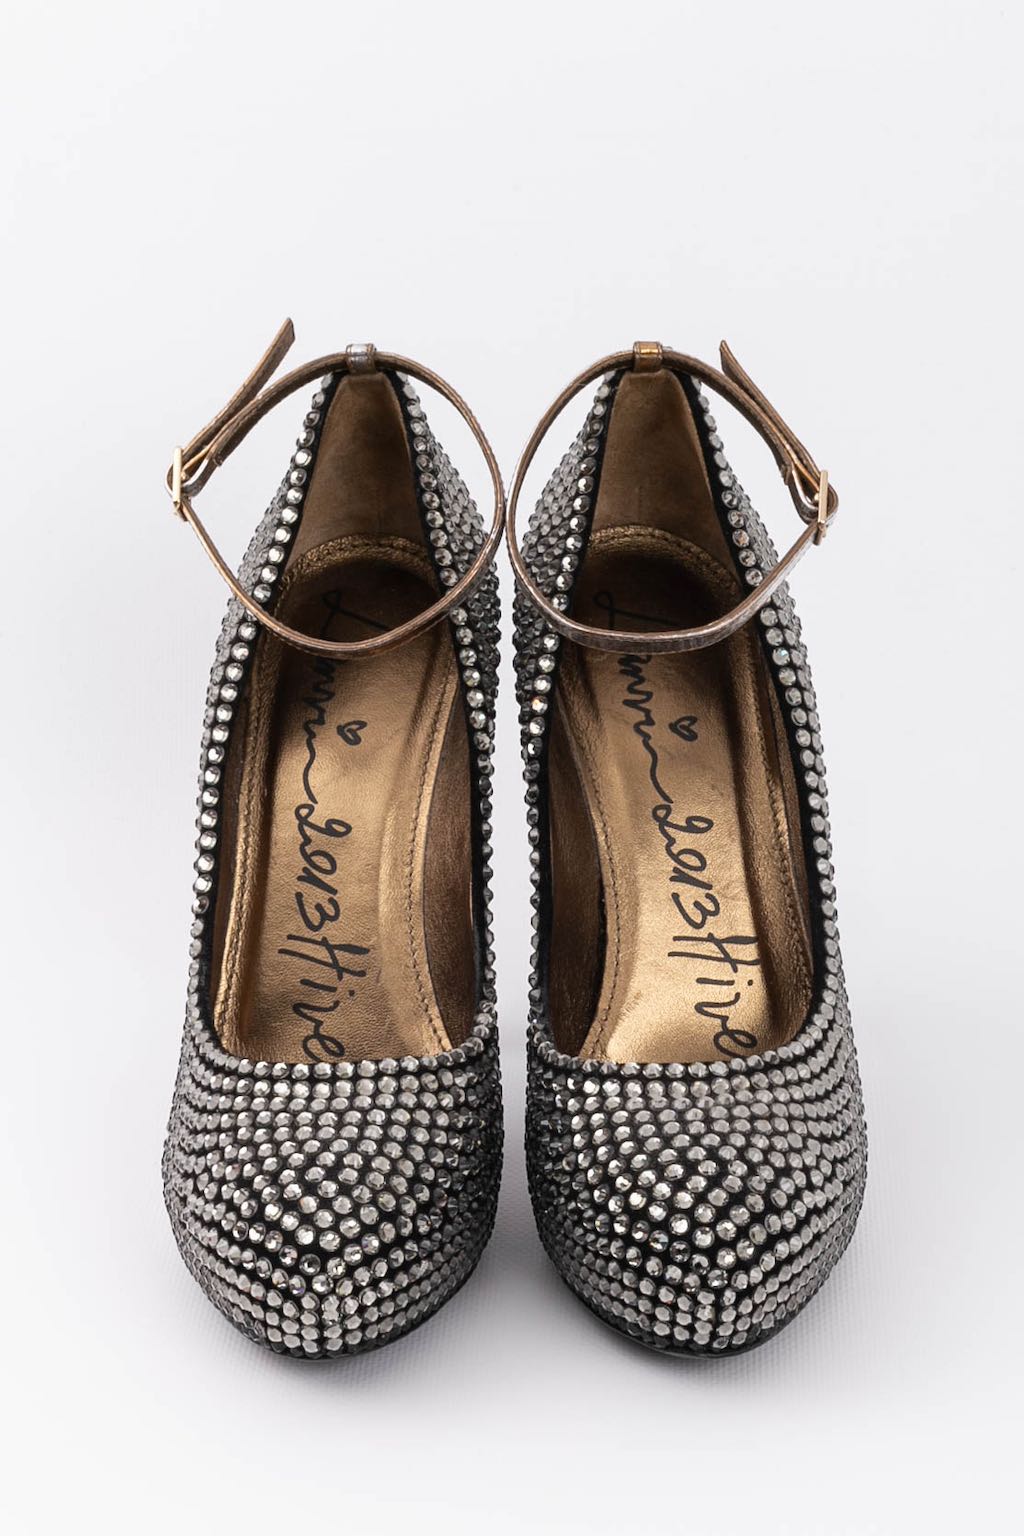 Lanvin sequined pumps, 2013 Winter Collection